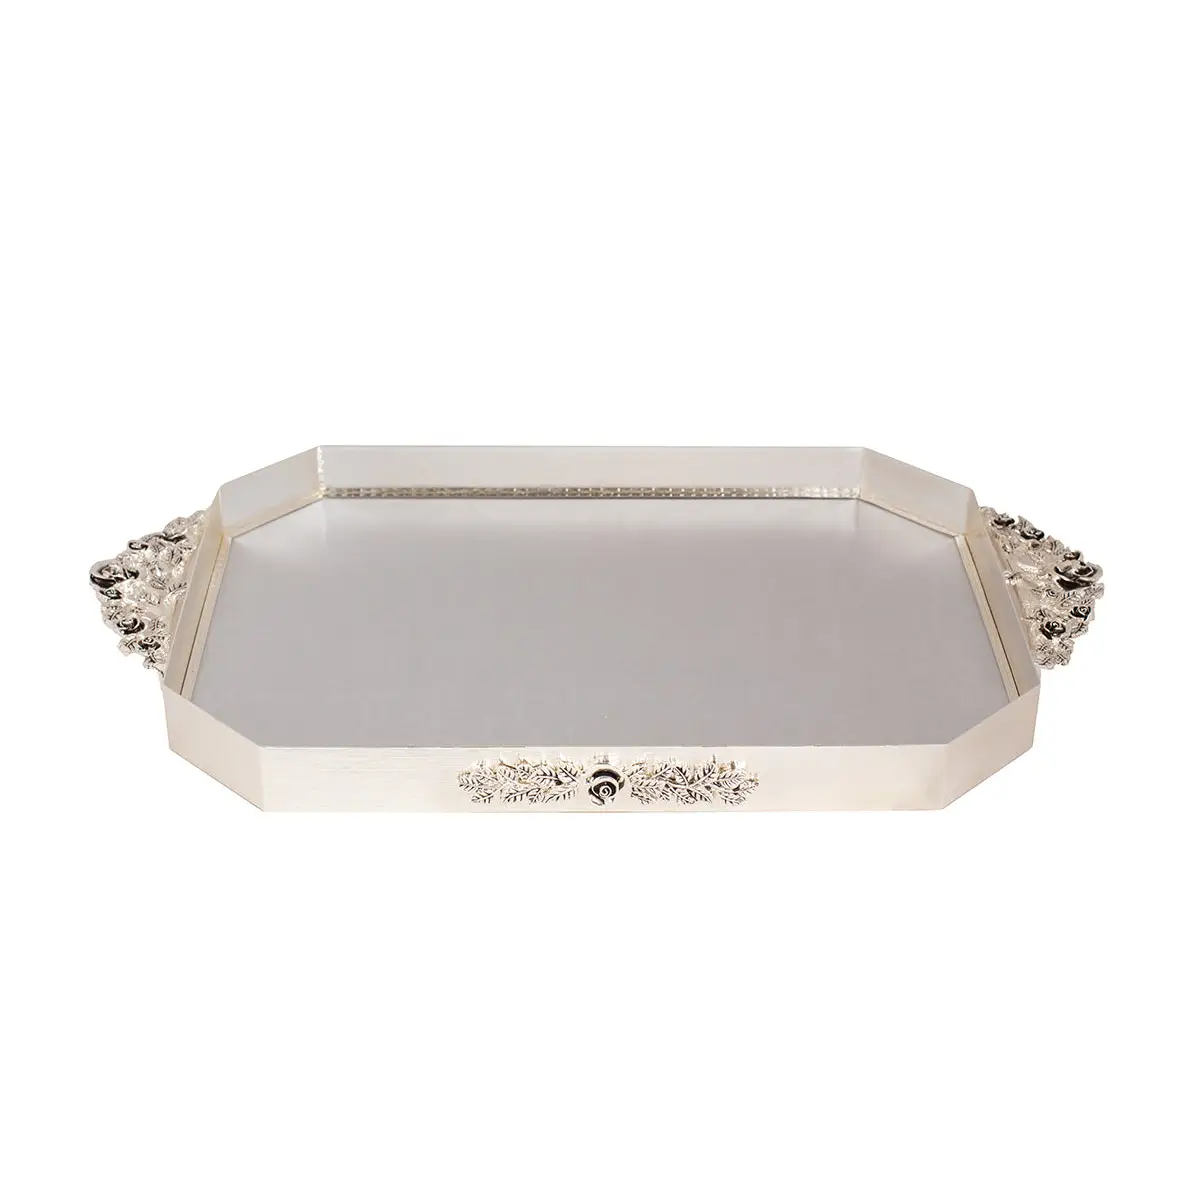 SILVER PLATED TRAY ROSE DESIGN - ROSE COLLECTION